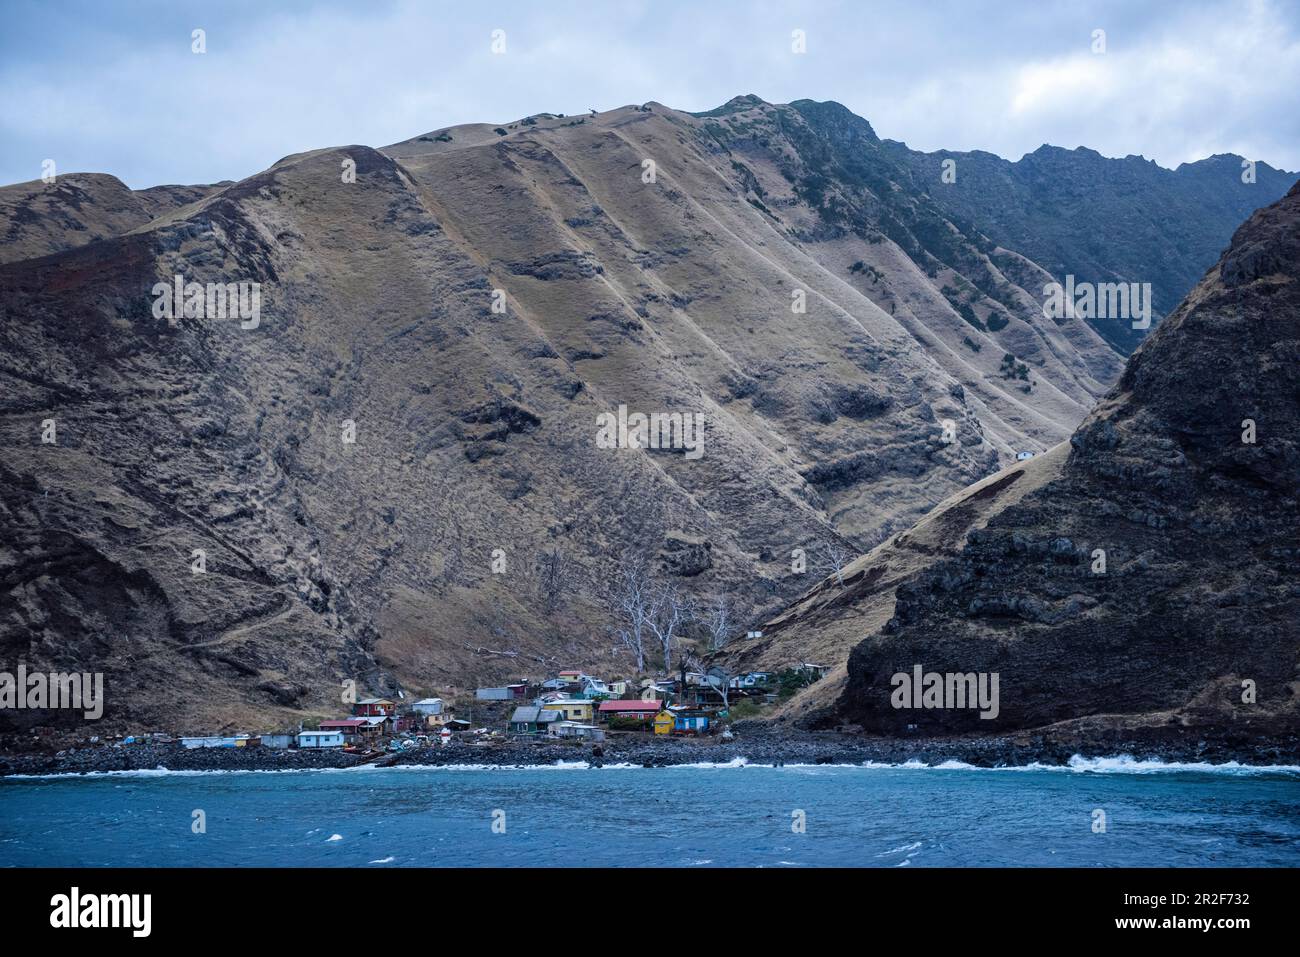 Approaching the former penal colony of Alejandro Selkirk Island (formerly Mas Afuera - Farther Out) and the settlement between two high ridges, Alejan Stock Photo